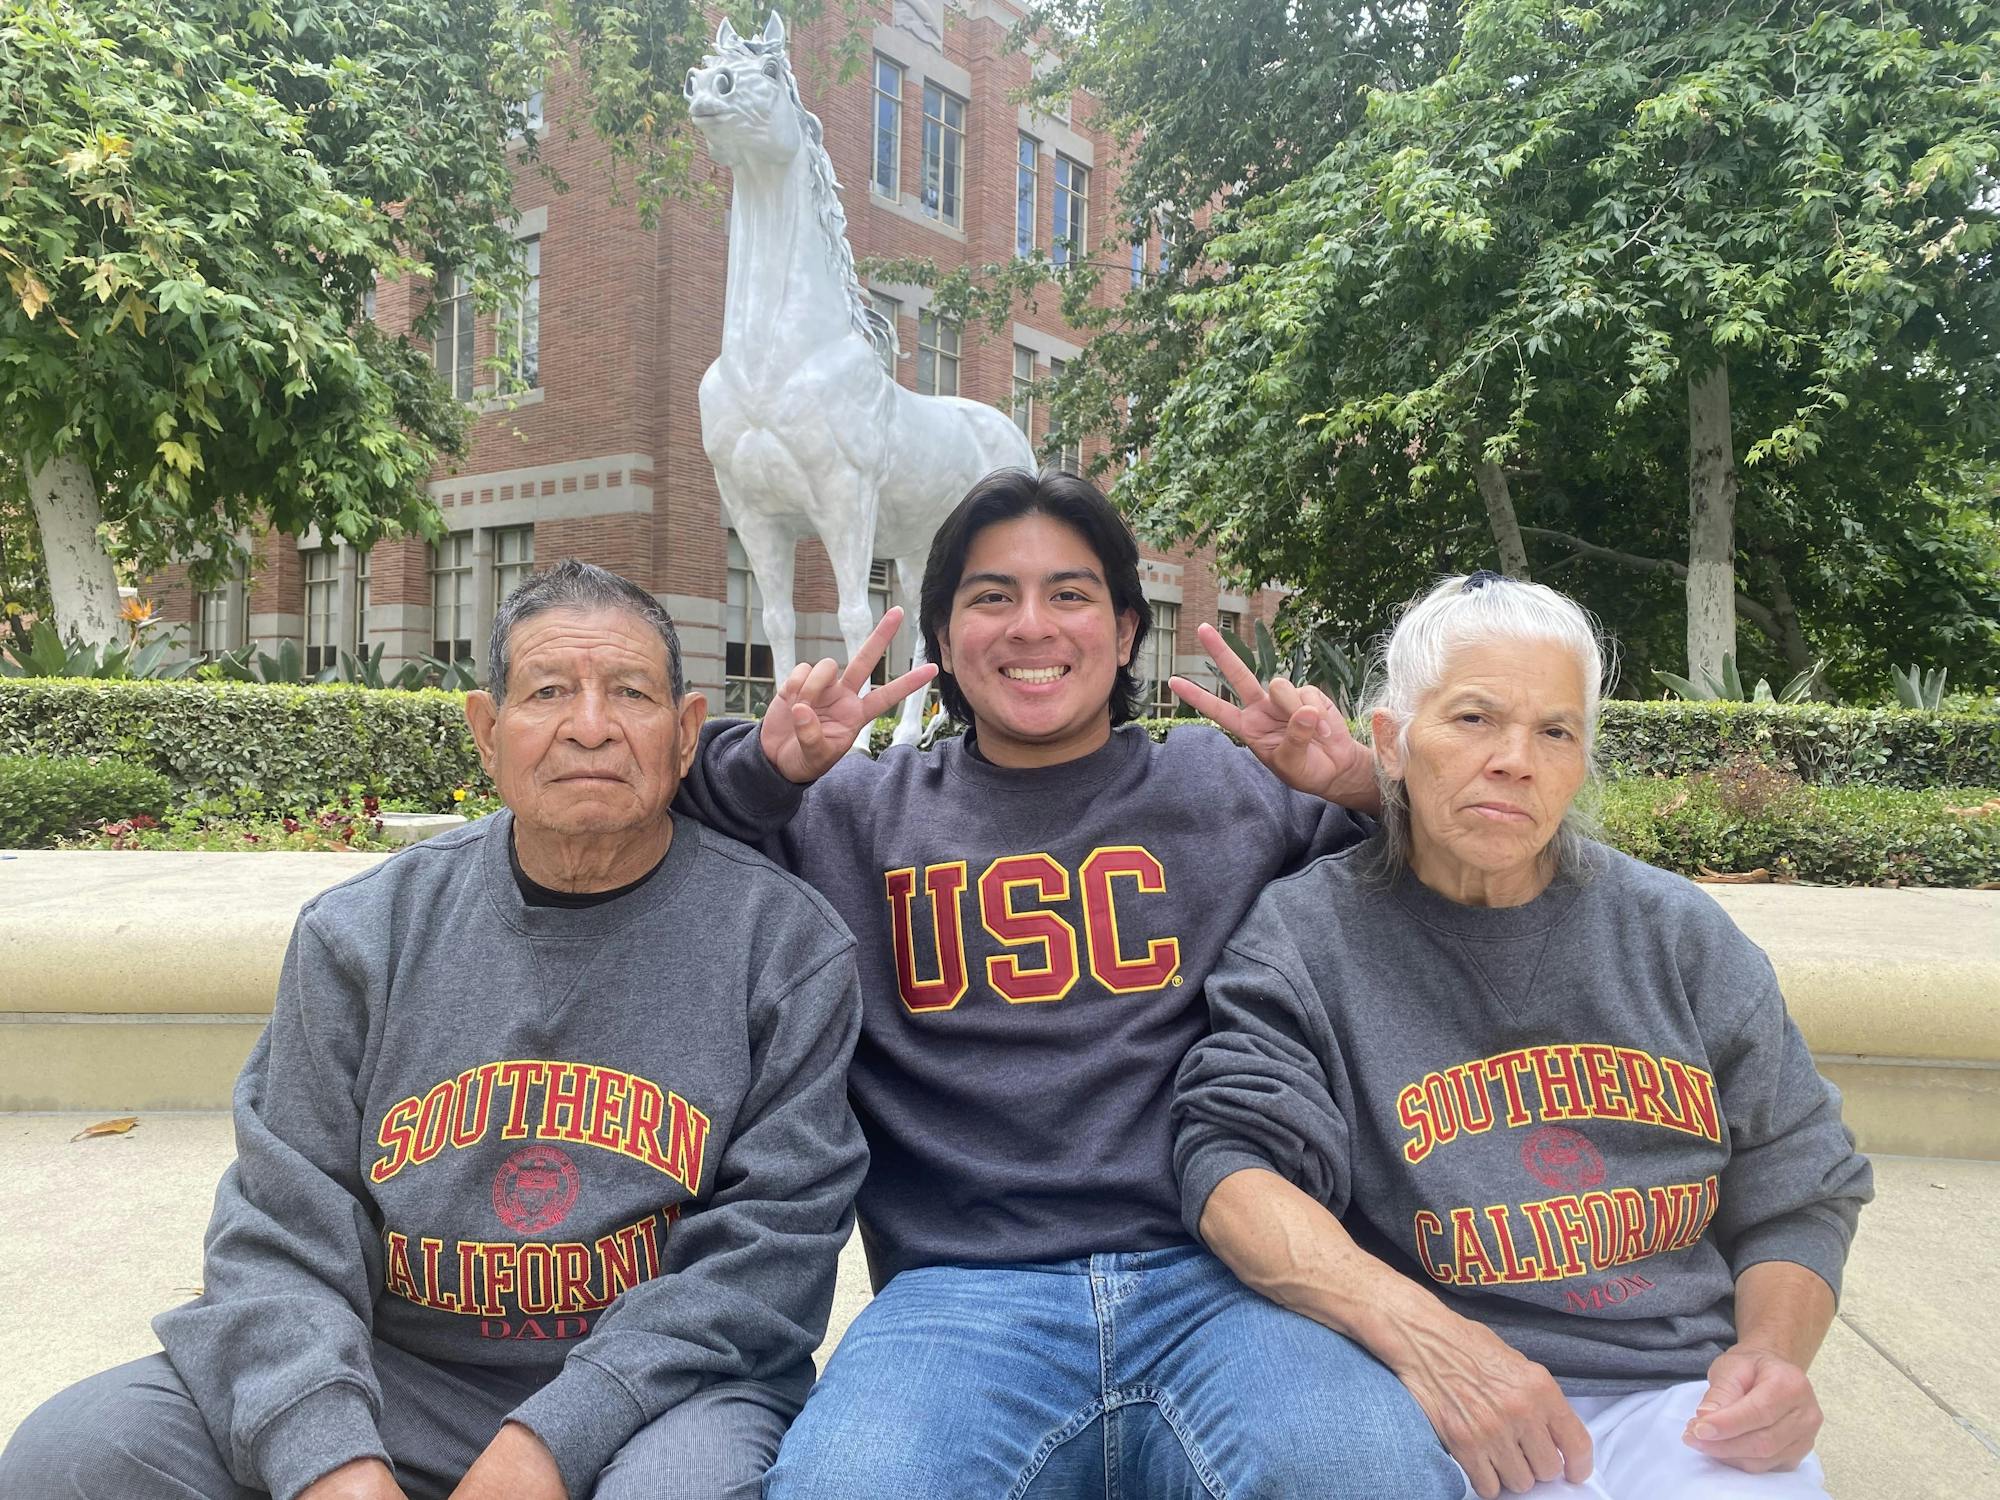 A young man sits between his parents, grinning as he holds up two hands in the "Fight on!" handsign. All three wear USC sweatshirts